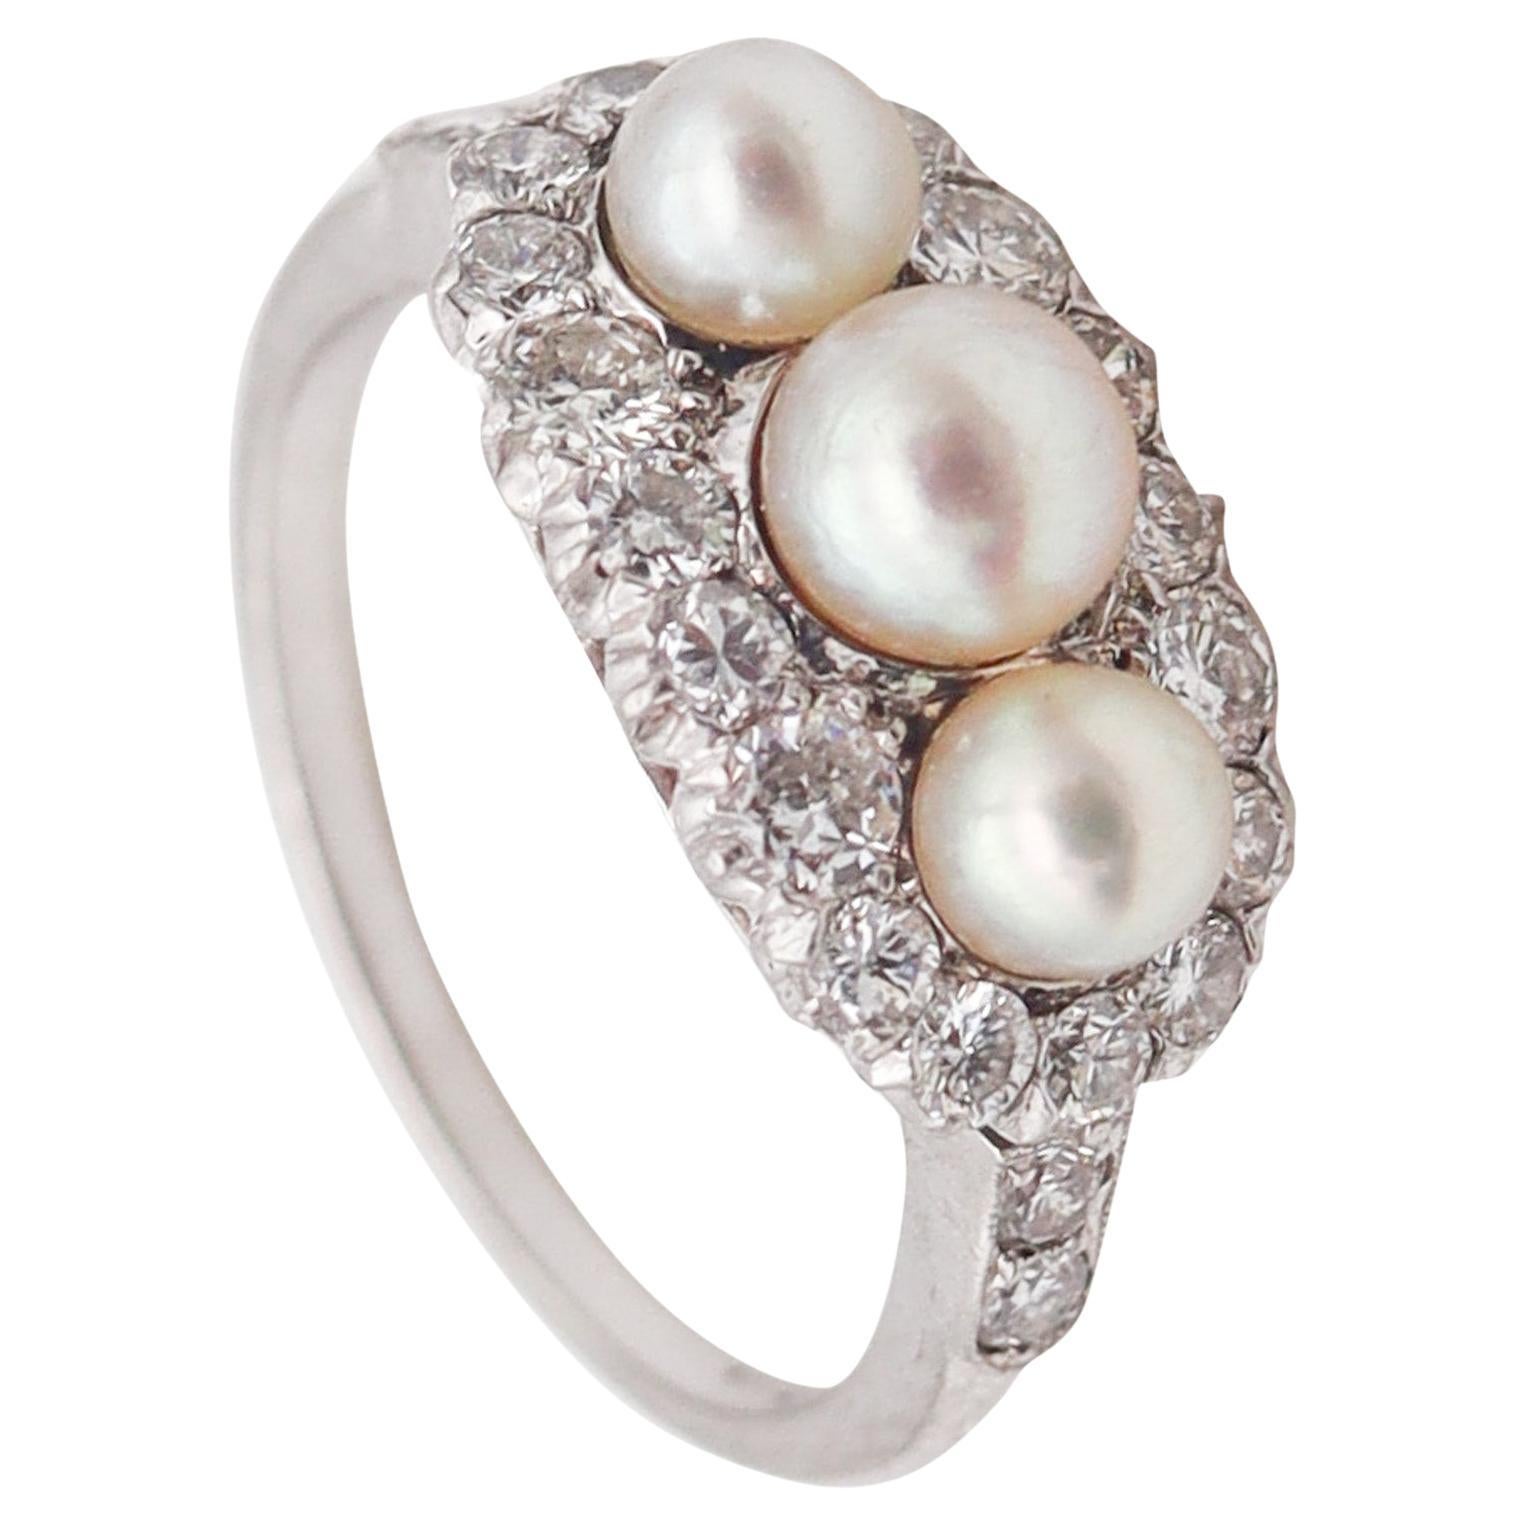 Tiffany & Co. 1910 Edwardian Ring In Platinum With 1.10 Ctw In Diamonds & Pearls For Sale